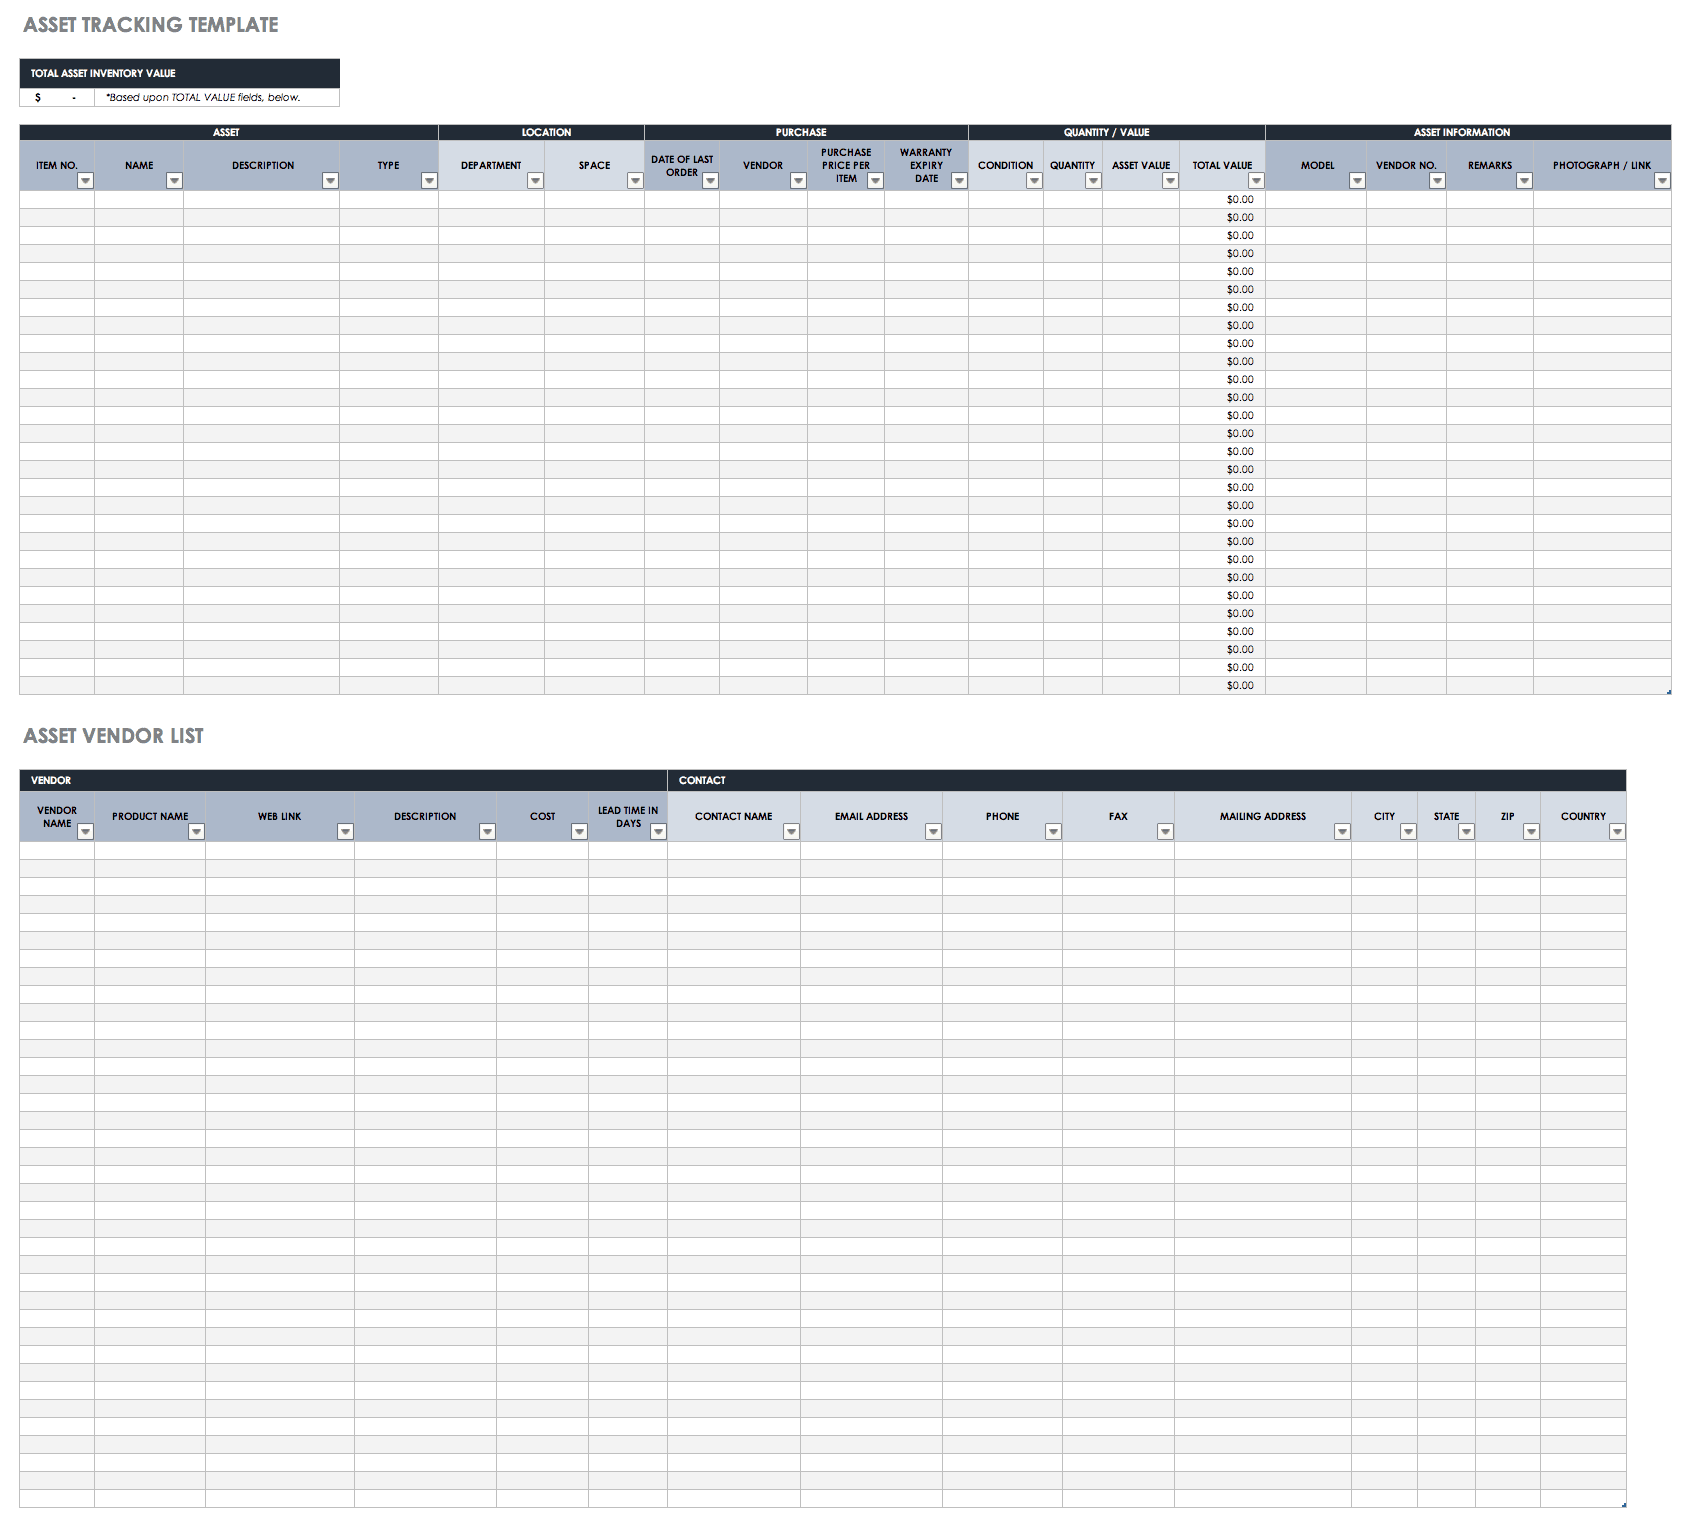 Software License Tracking Excel Template from www.smartsheet.com